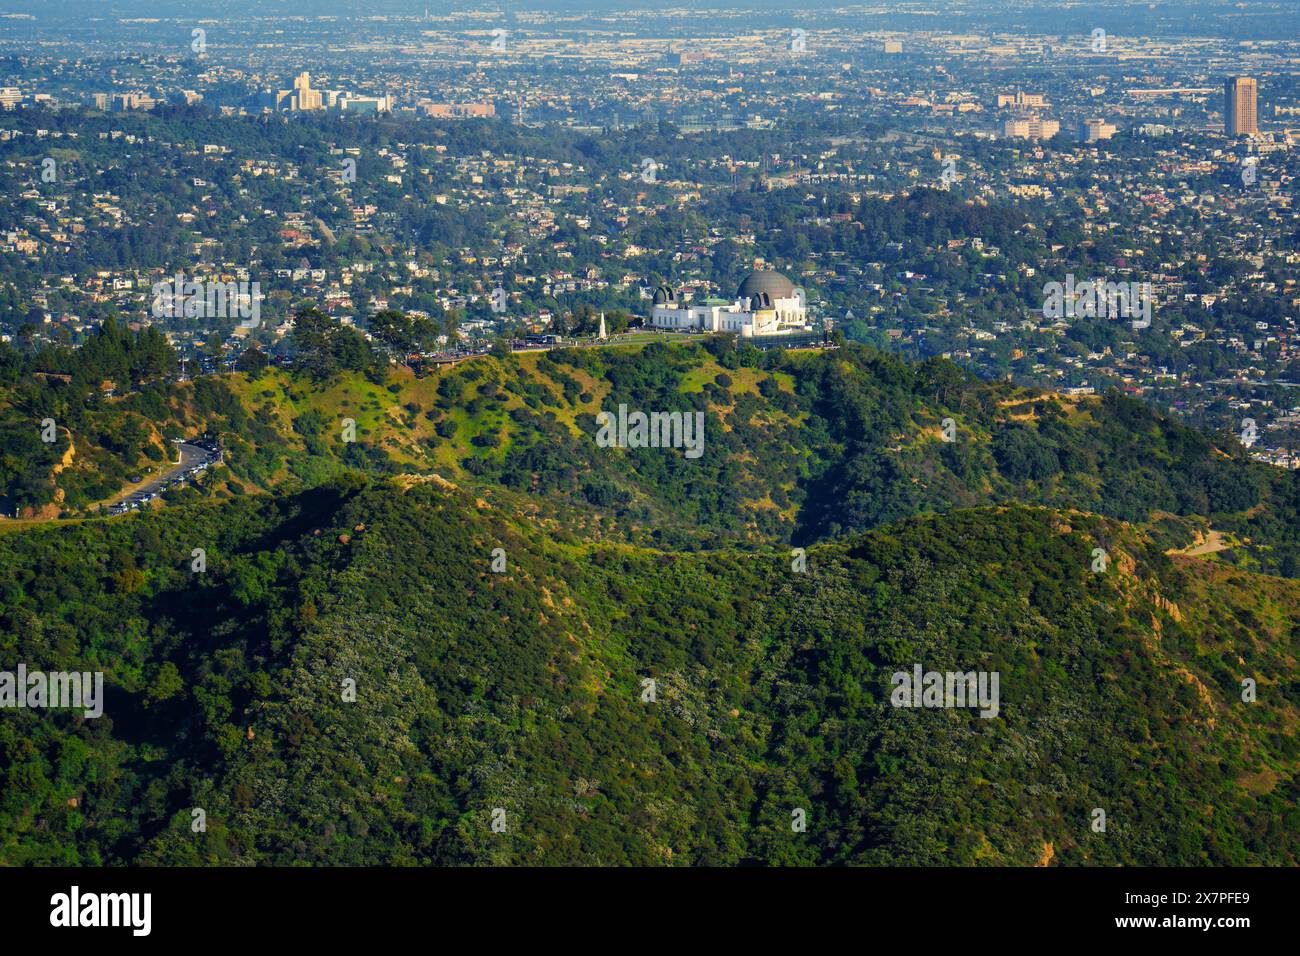 Griffith Observatory seen from a bird's-eye perspective, nestled amidst lush green hills with the city skyline in the distance. Stock Photo